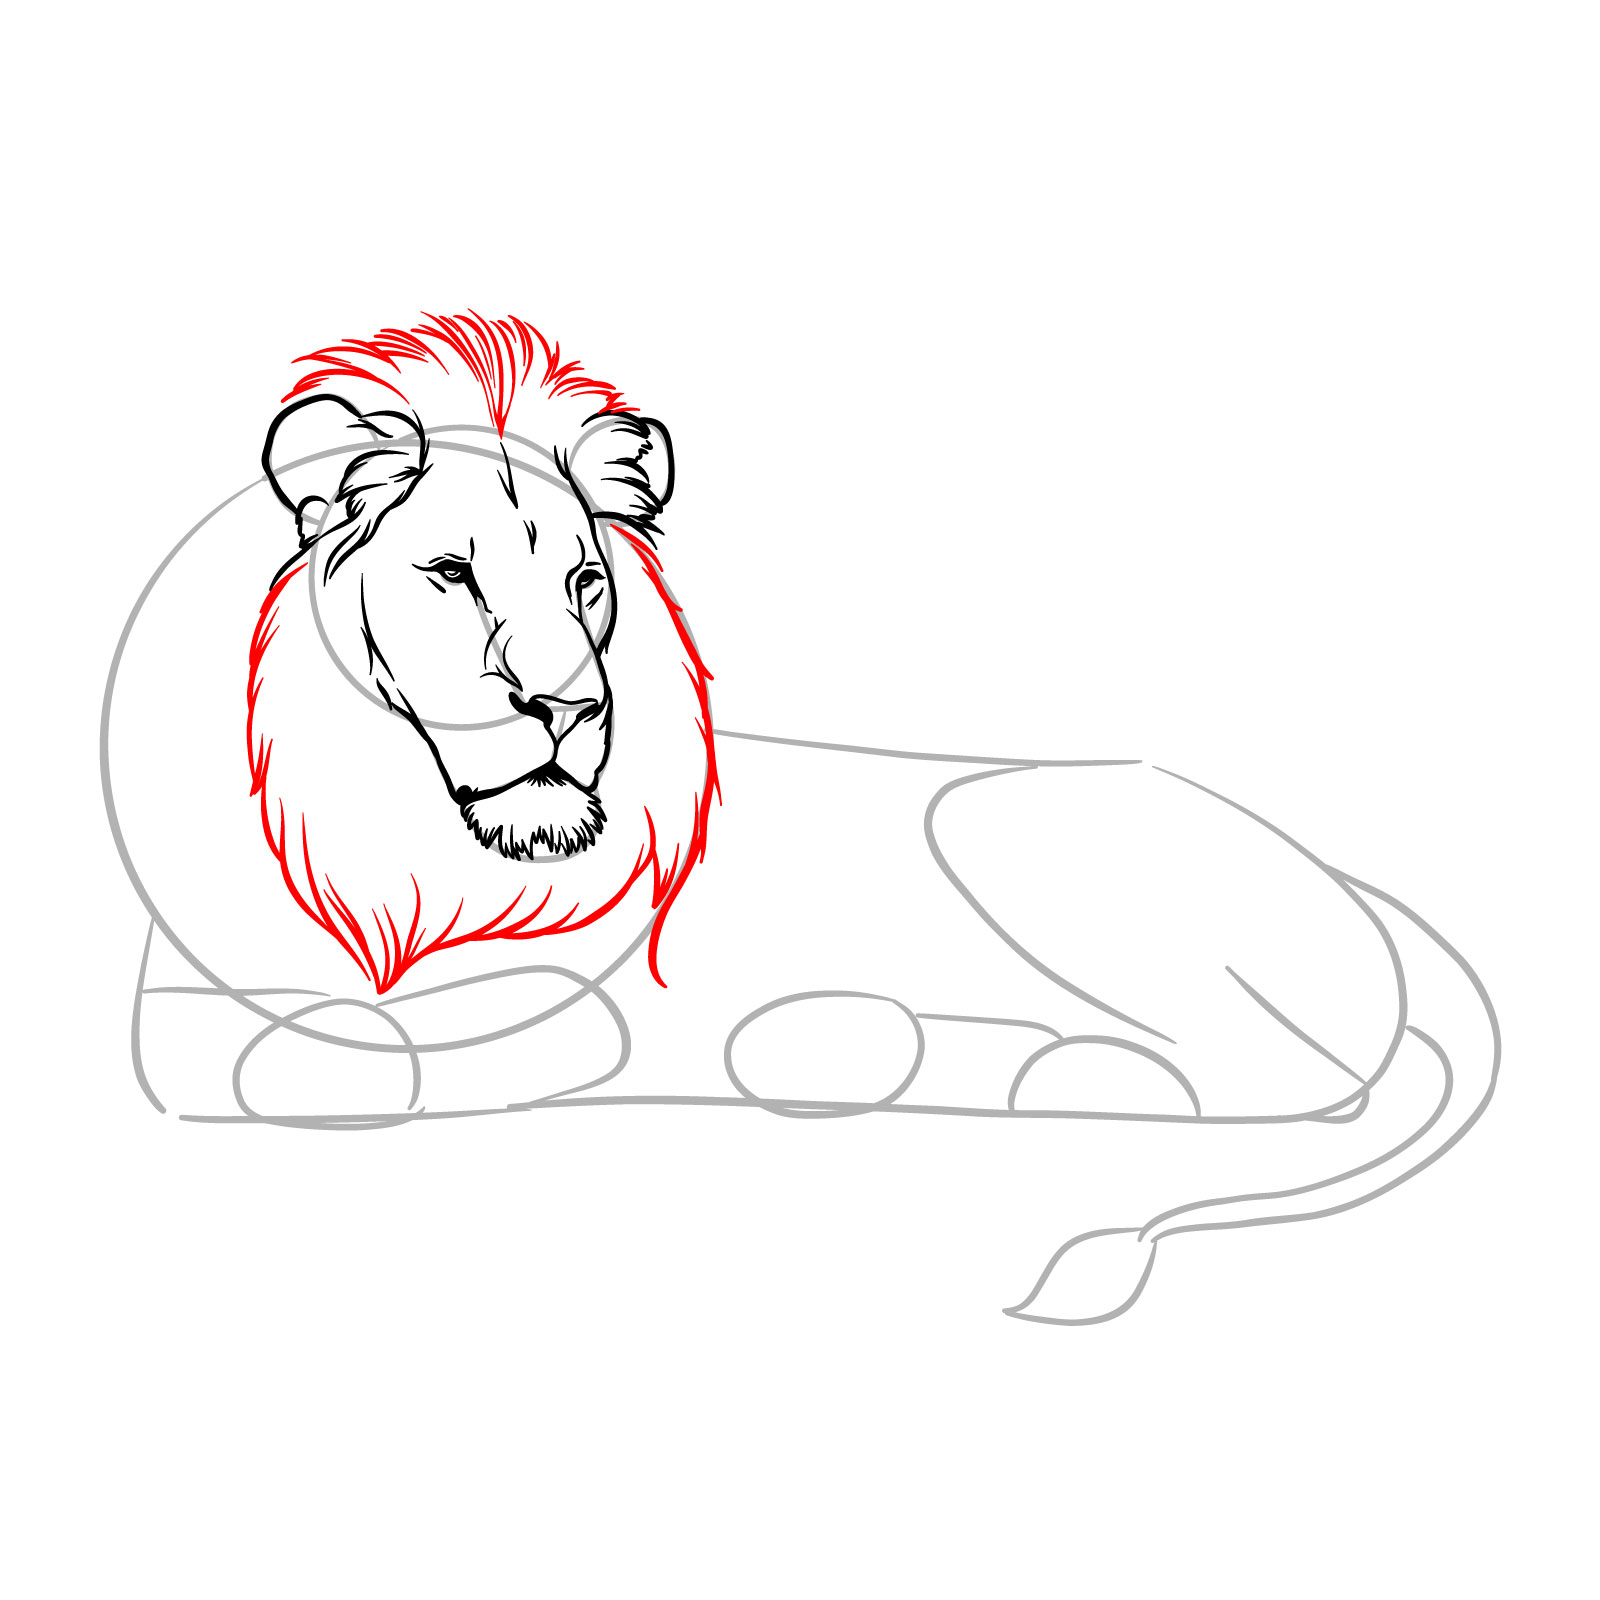 Lying lion drawing - Step 8: Sketching the mane and top head fur